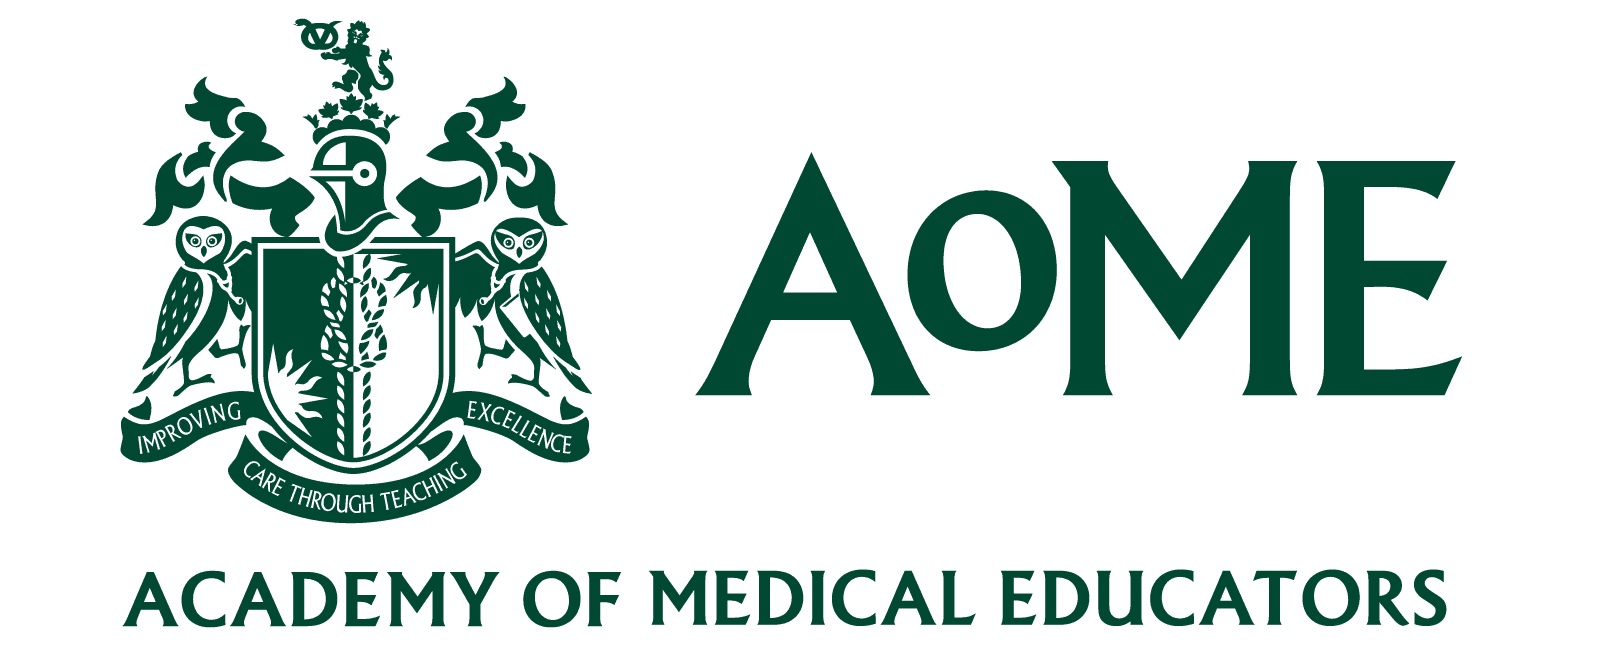 Academy of Medical Educators logo - Improving care through teaching excellence